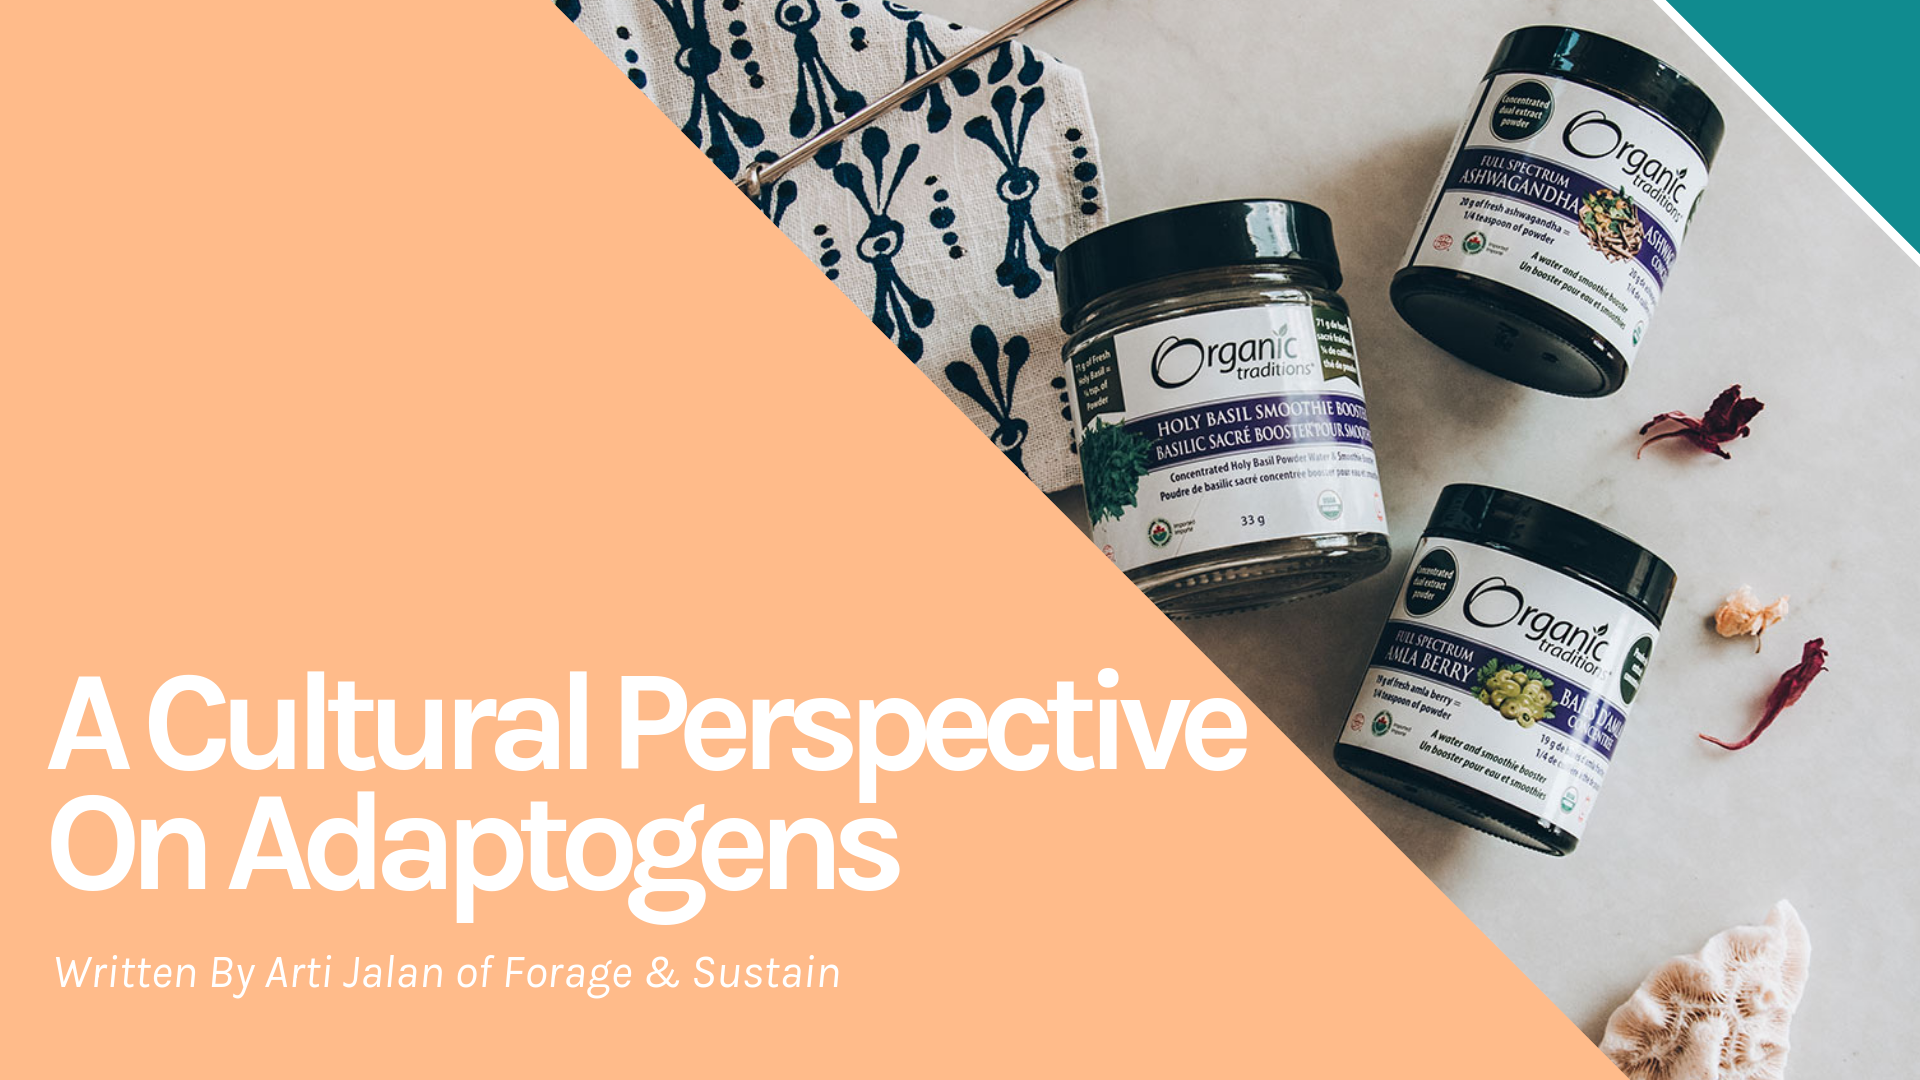 A Cultural Perspective on Adaptogens